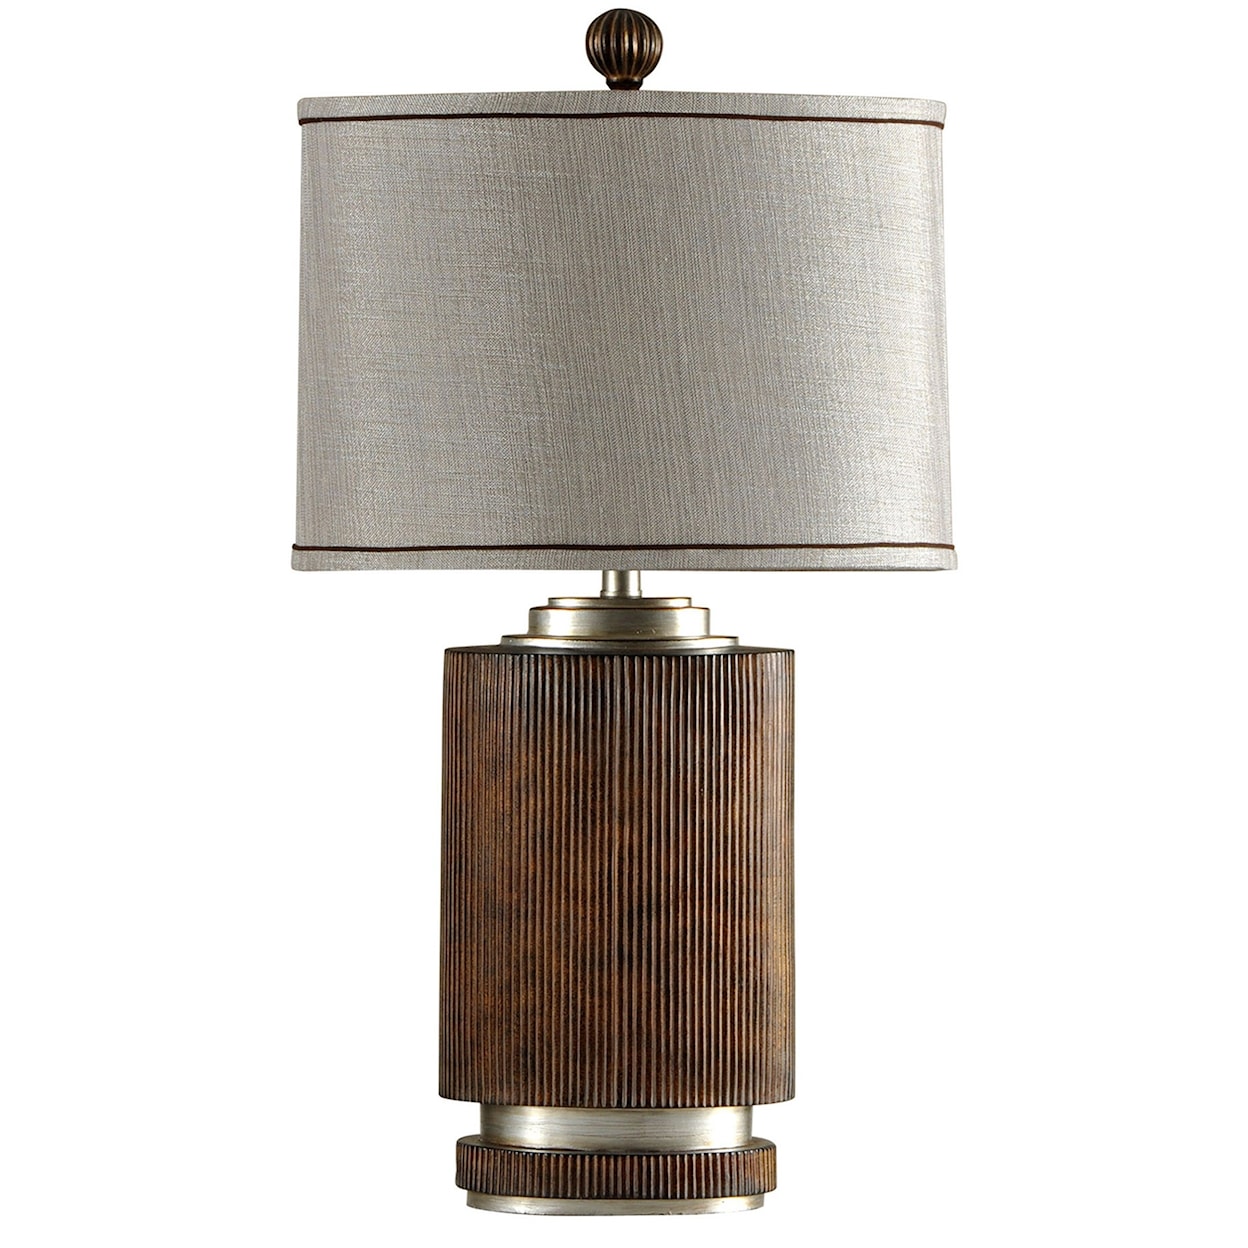 StyleCraft Lamps Ribbed Wood Finish Table Lamp